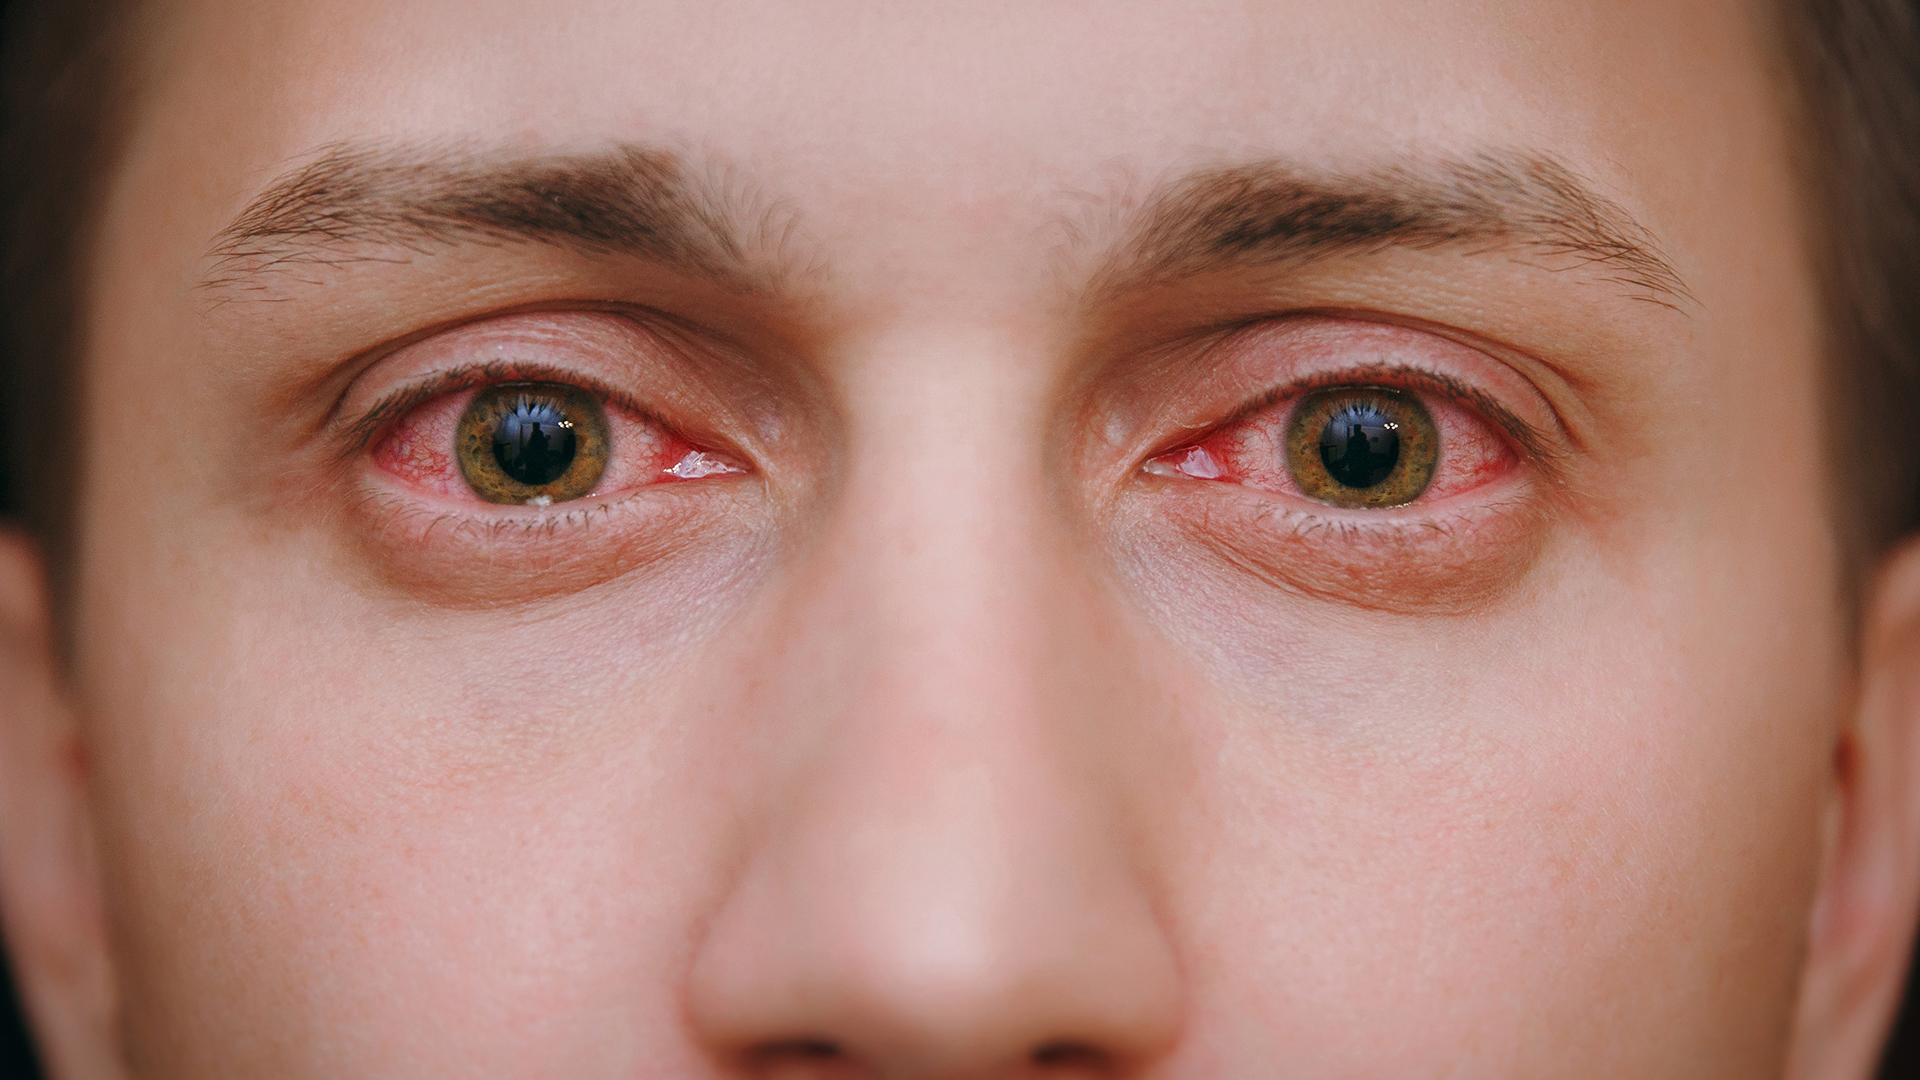 Allergic Conjunctivitis: Types, Causes, and Symptoms